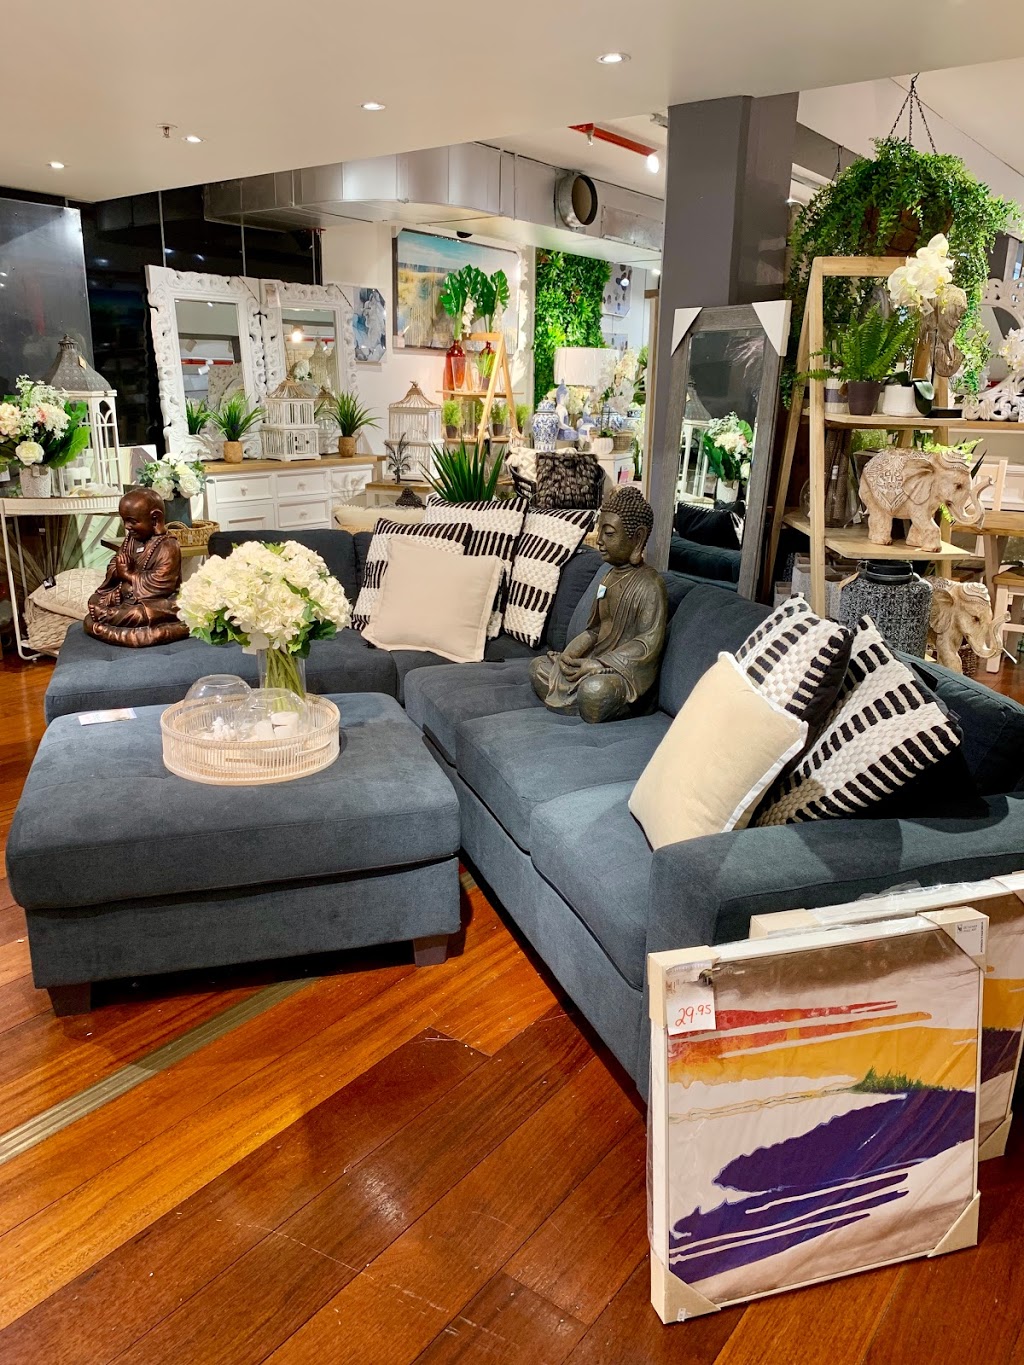 The Outlet Homewares & Furniture | home goods store | Runaway Bay Centre, Runaway Bay QLD 4216, Australia | 0475139566 OR +61 475 139 566